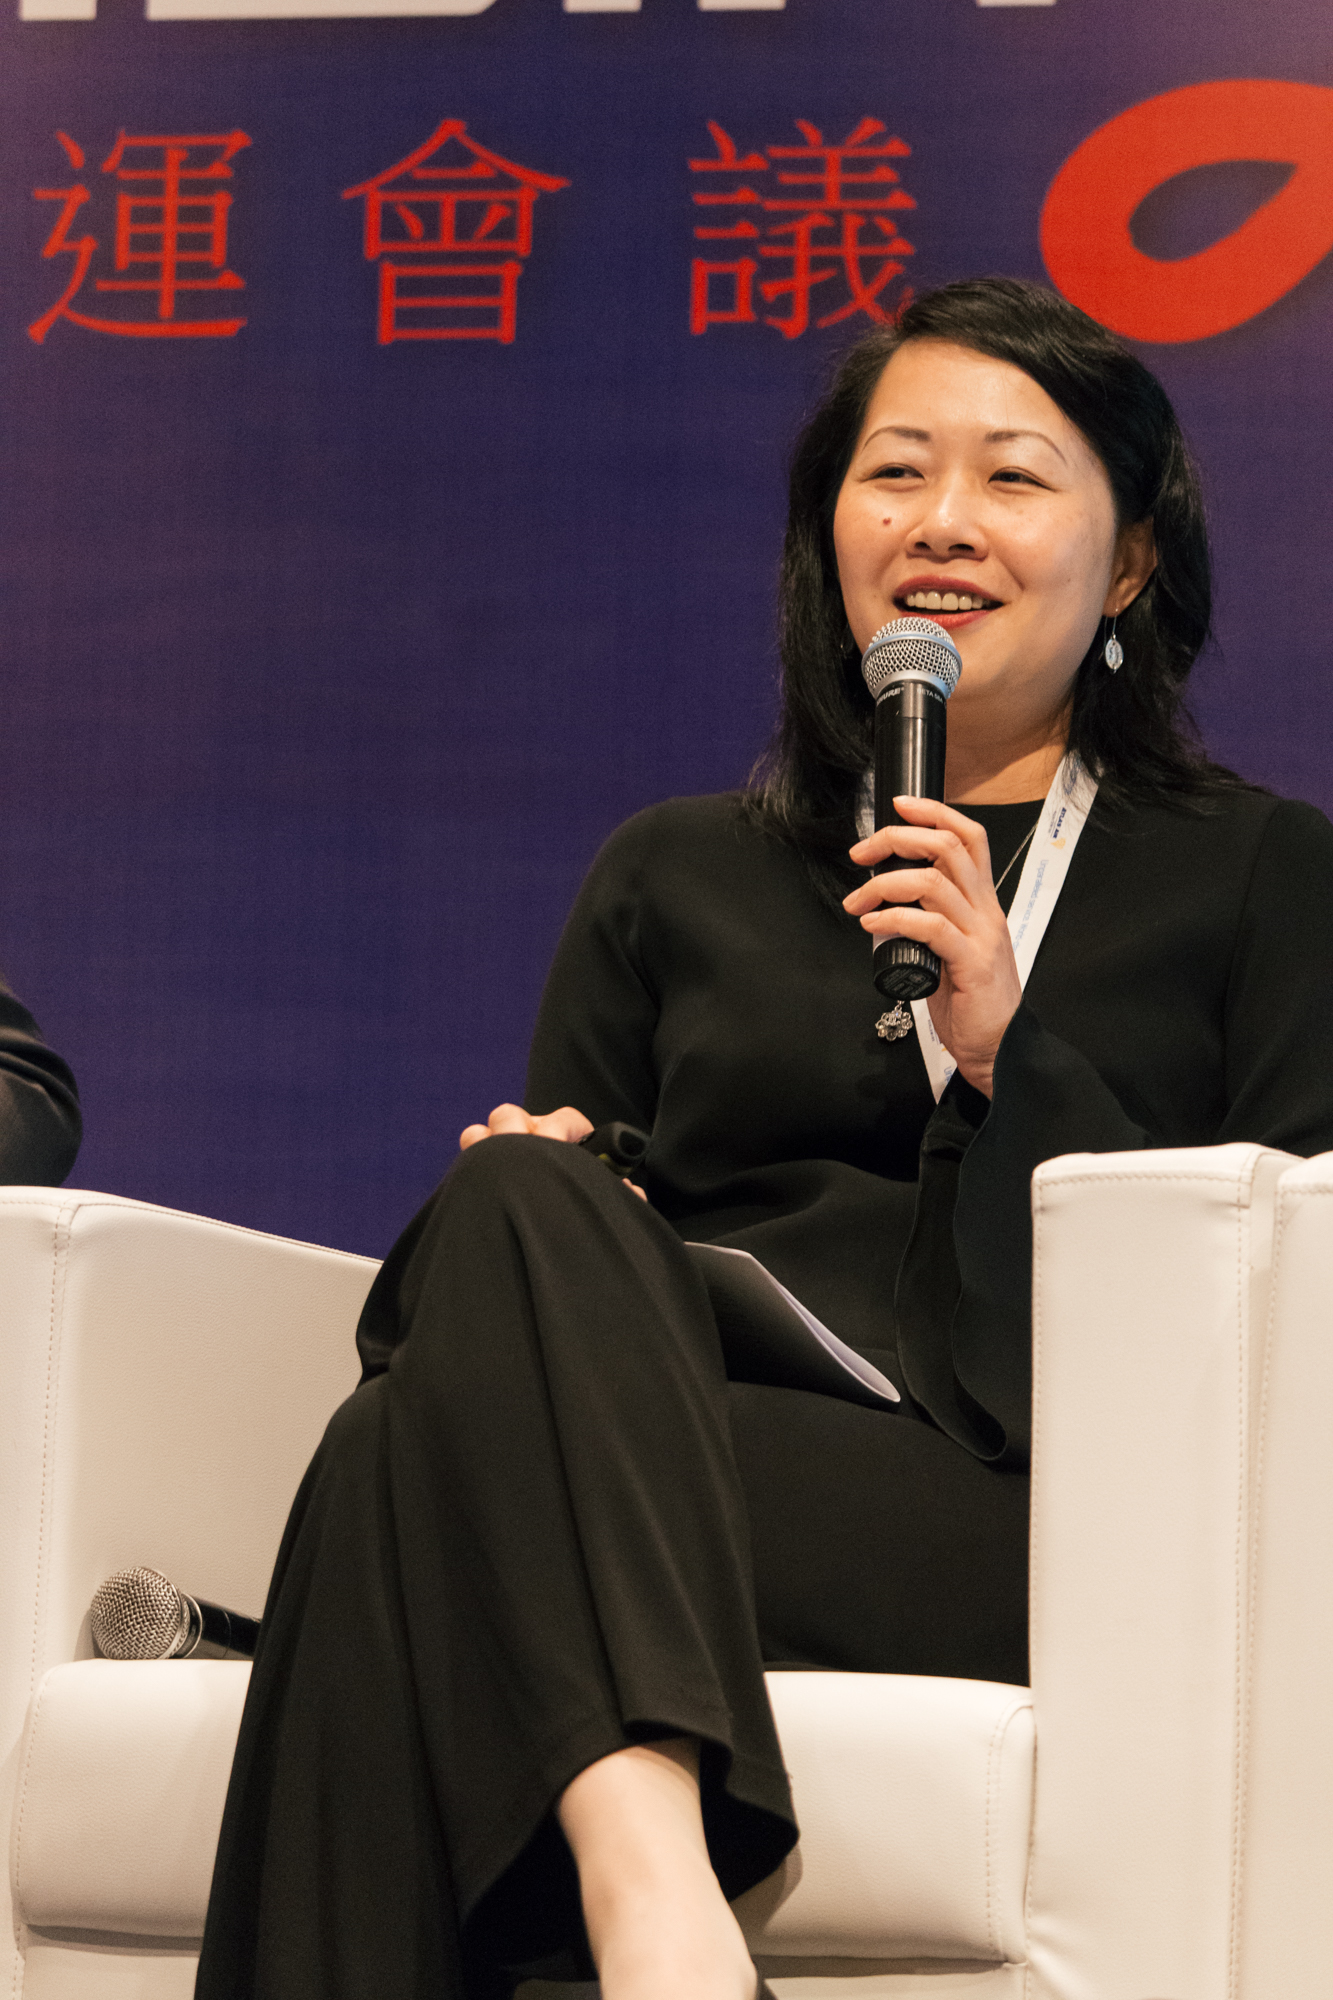 AirBridgeCargo's Asia boss, Joanna Li, had much to say about the impact of the One Belt, One Road initiative.